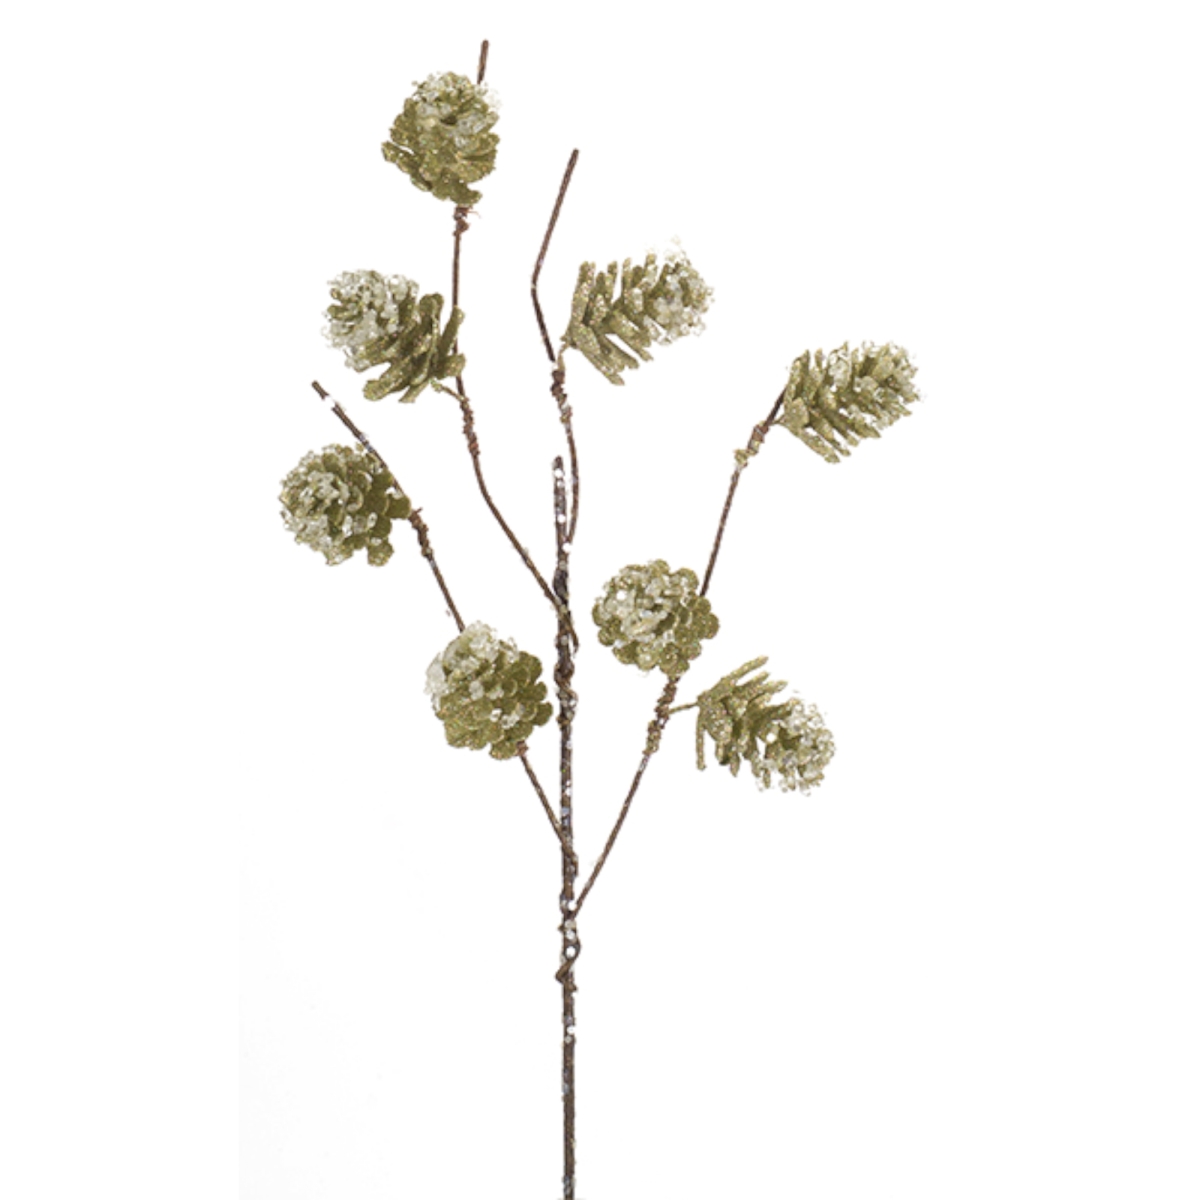 72860ds 23 In. Plastic Pine Cone Branch, Green & Brown - Set Of 12